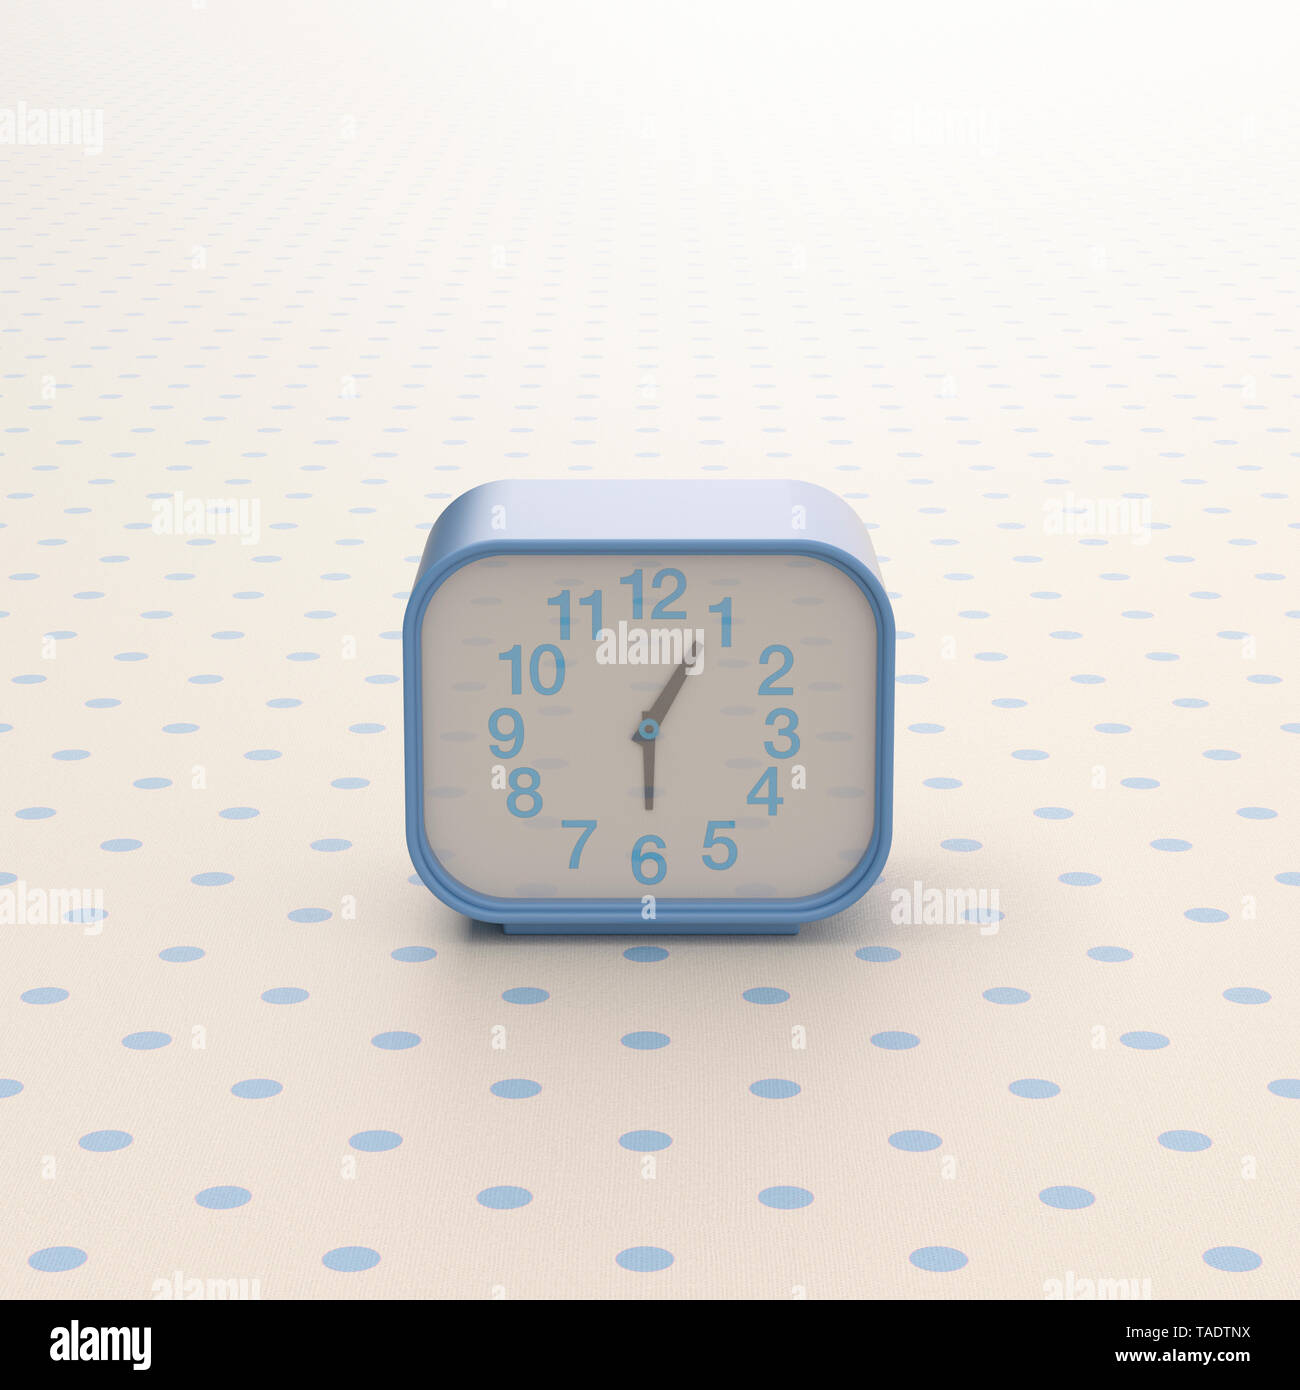 3D rendering, Alarm clock on background with polka dits Stock Photo